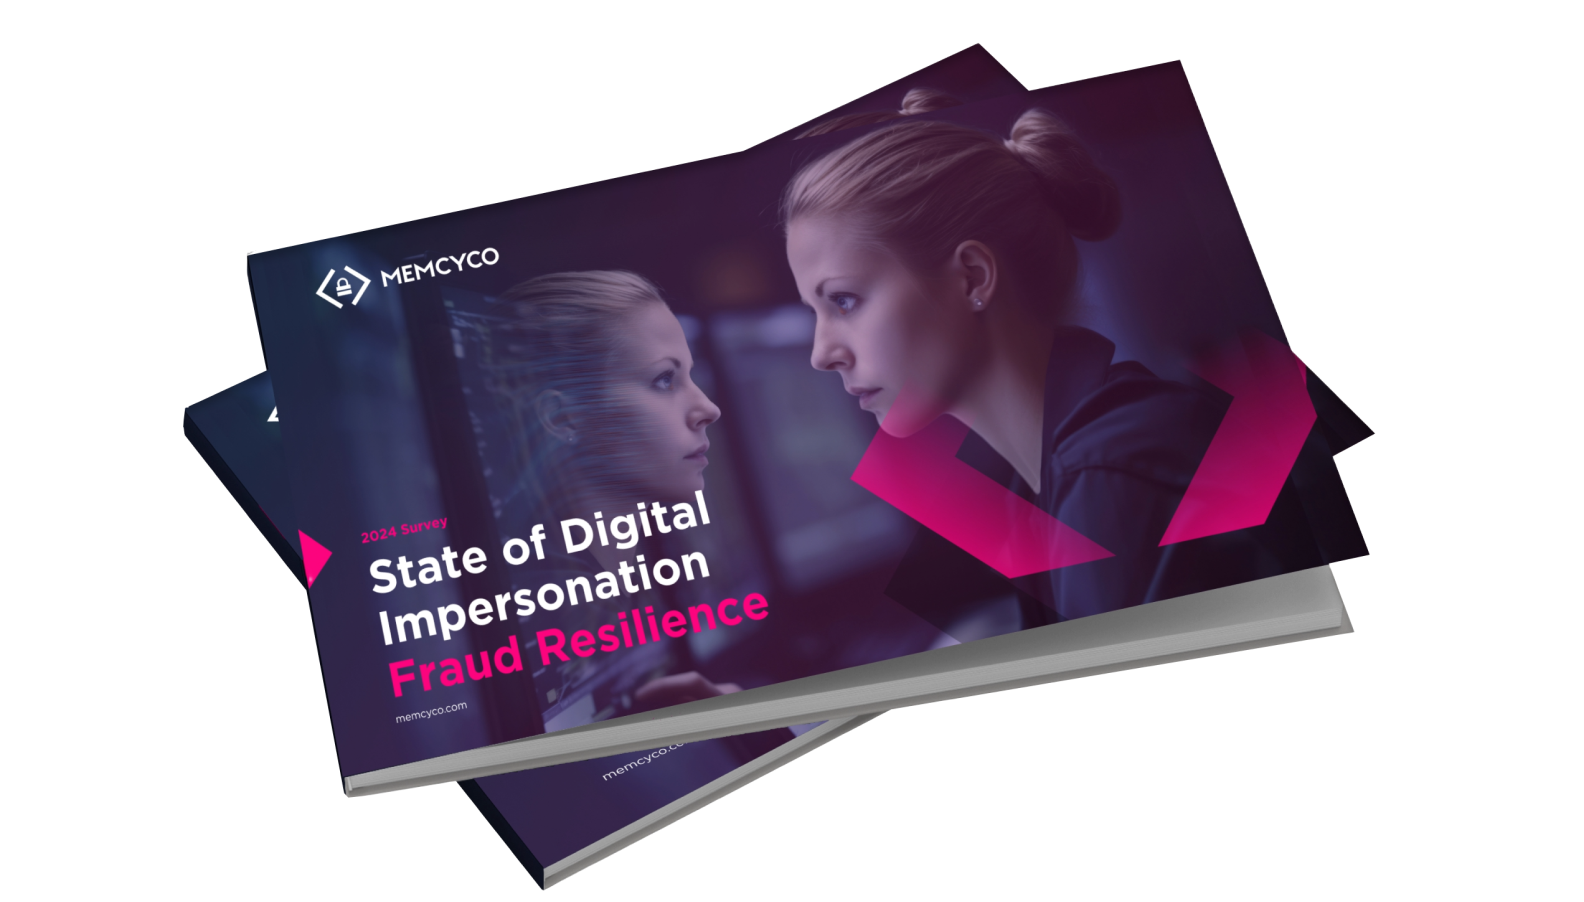 State of Digital Impersonation Fraud Resilience шьфпу